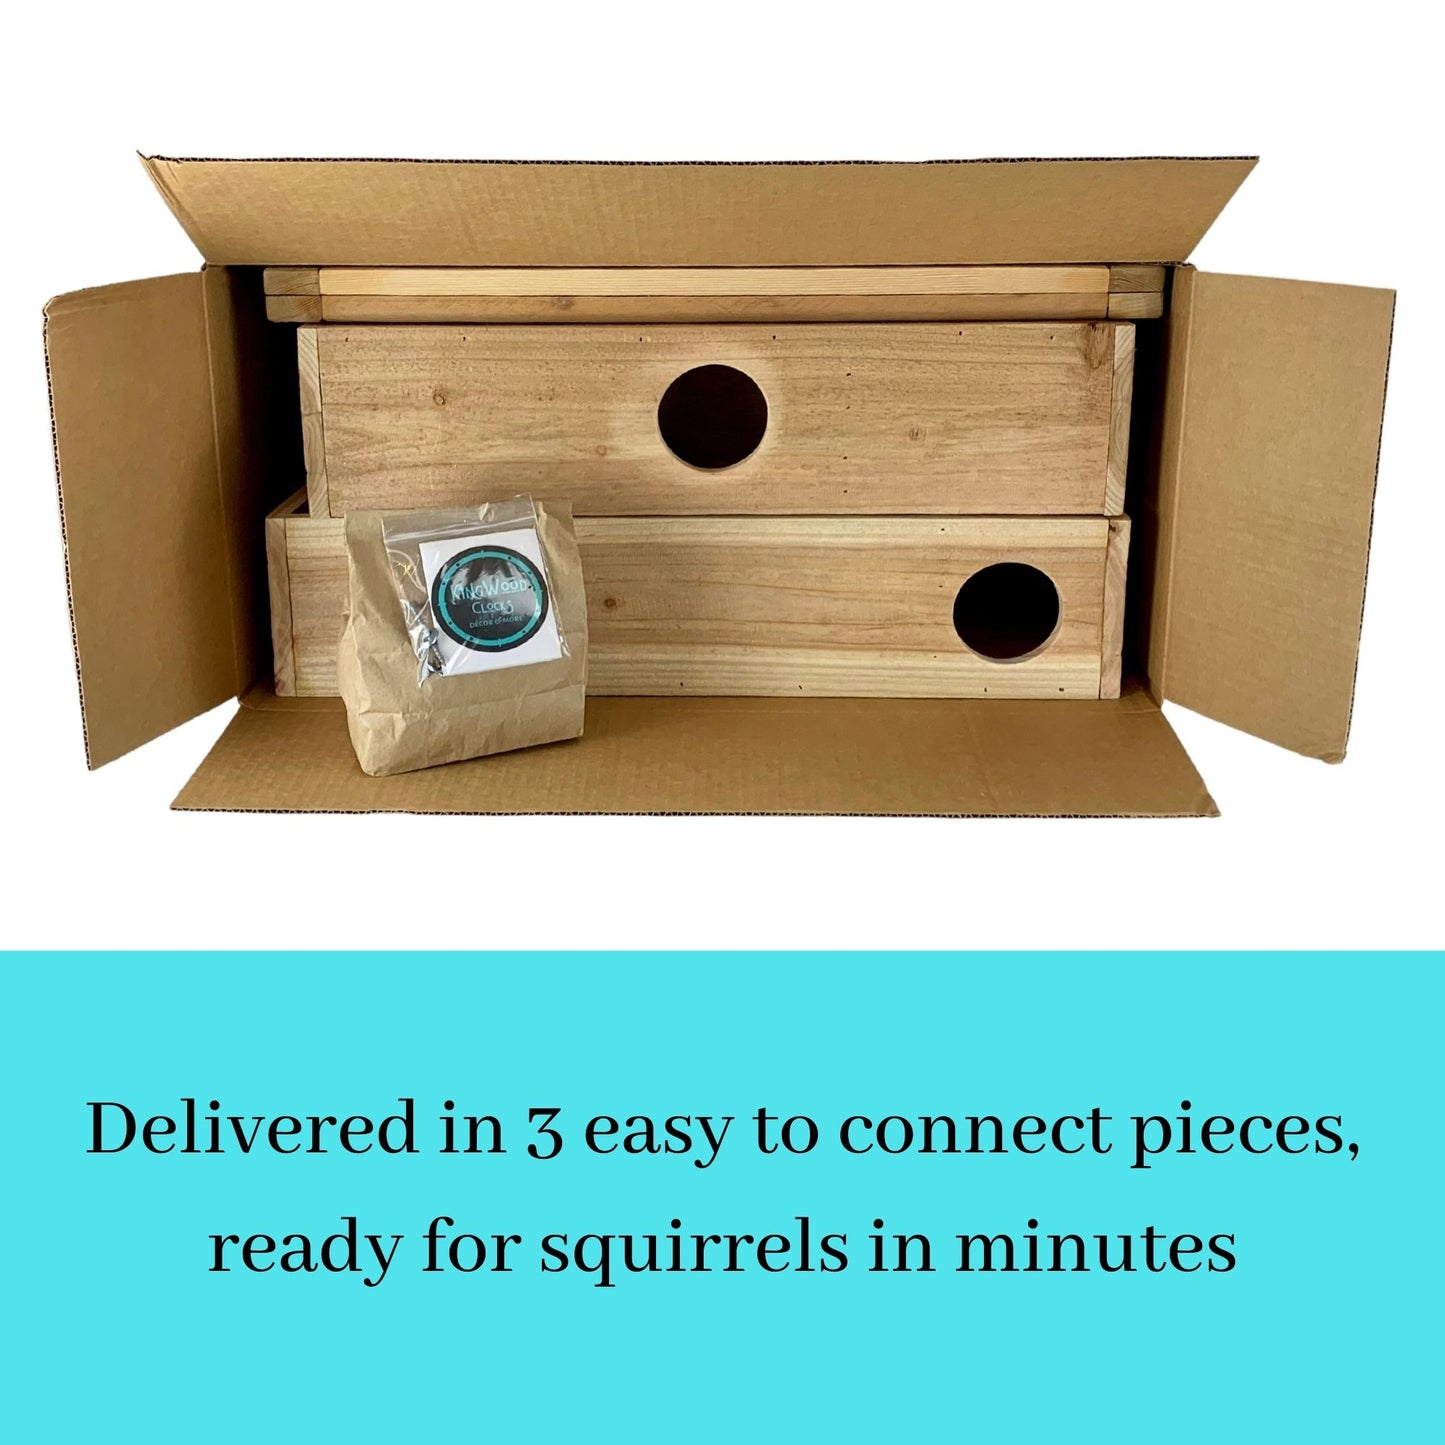 KingWood Squirrel Maze Feeder arrives well packed and ready for quick assembly